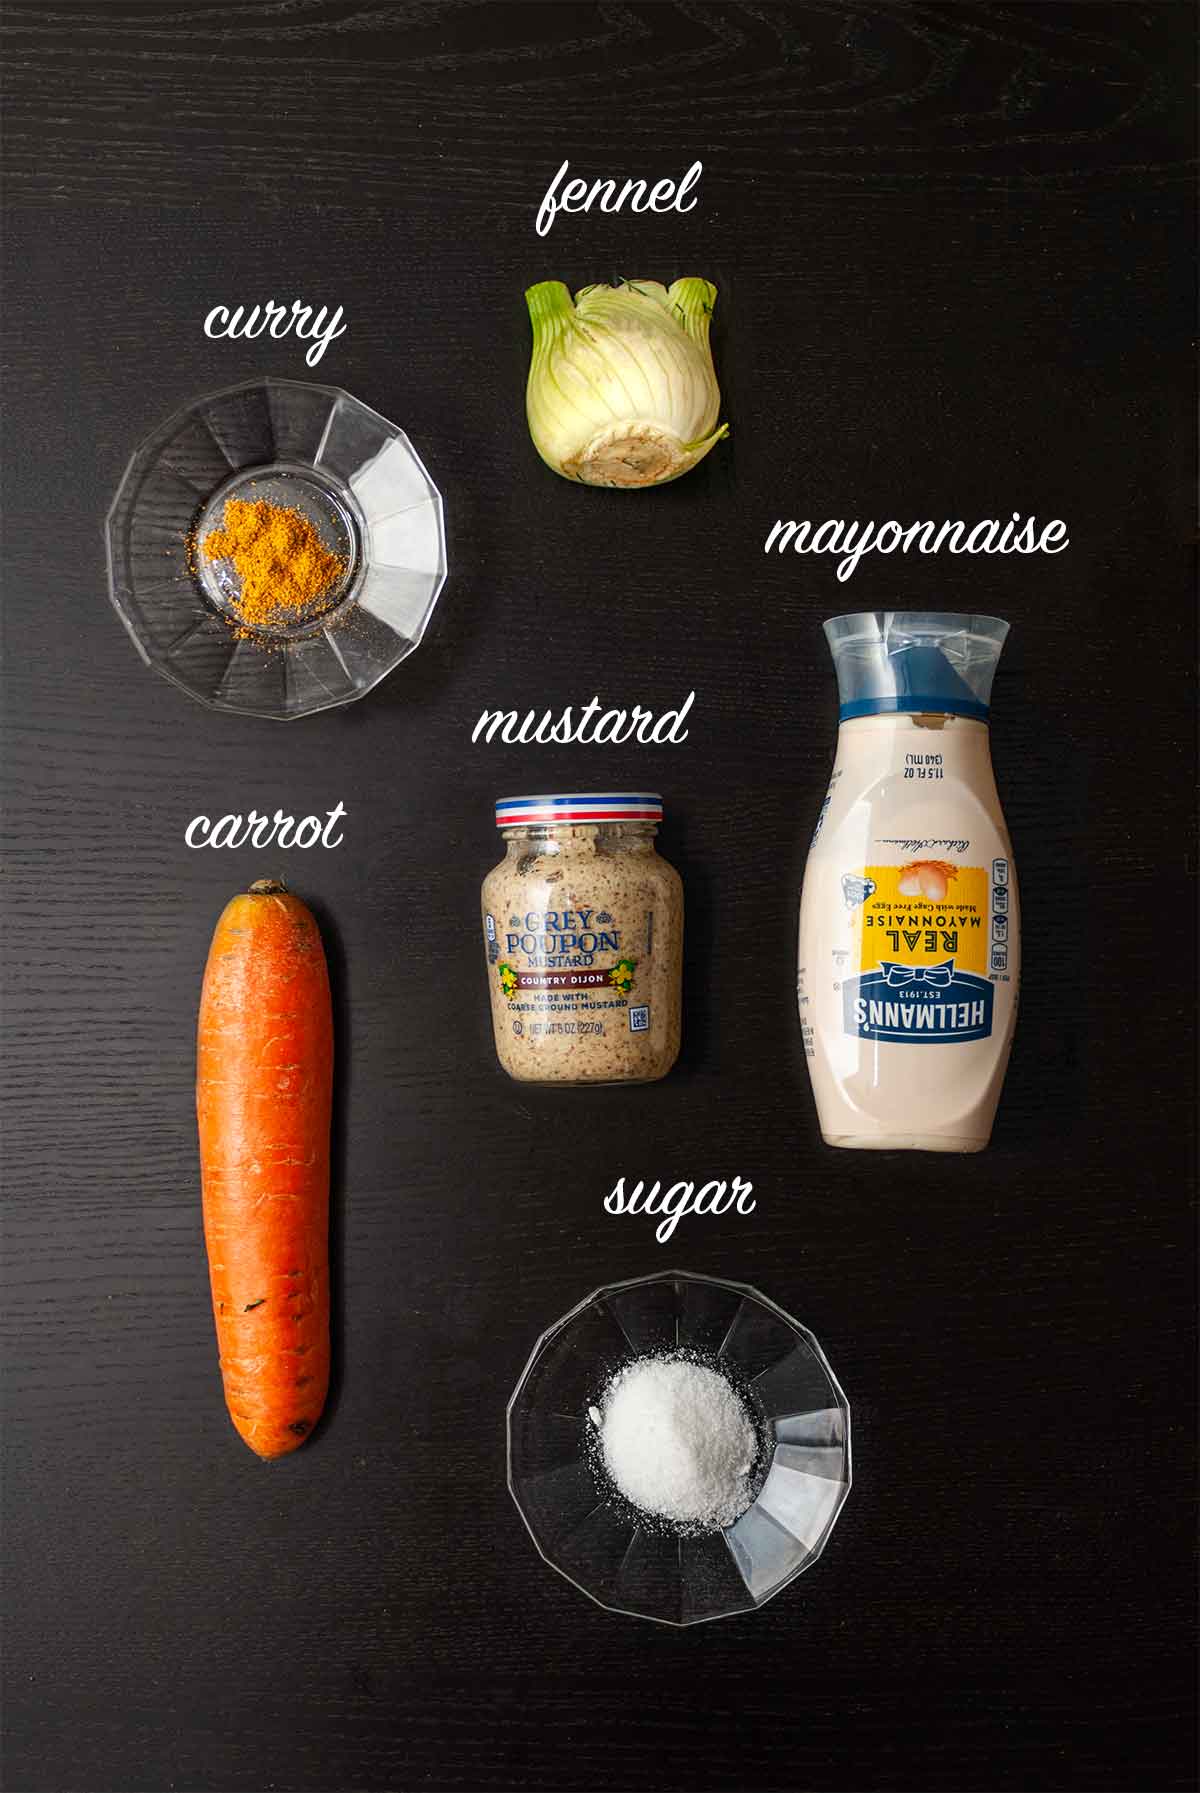 6 ingredients on a table with labels describing what they are.